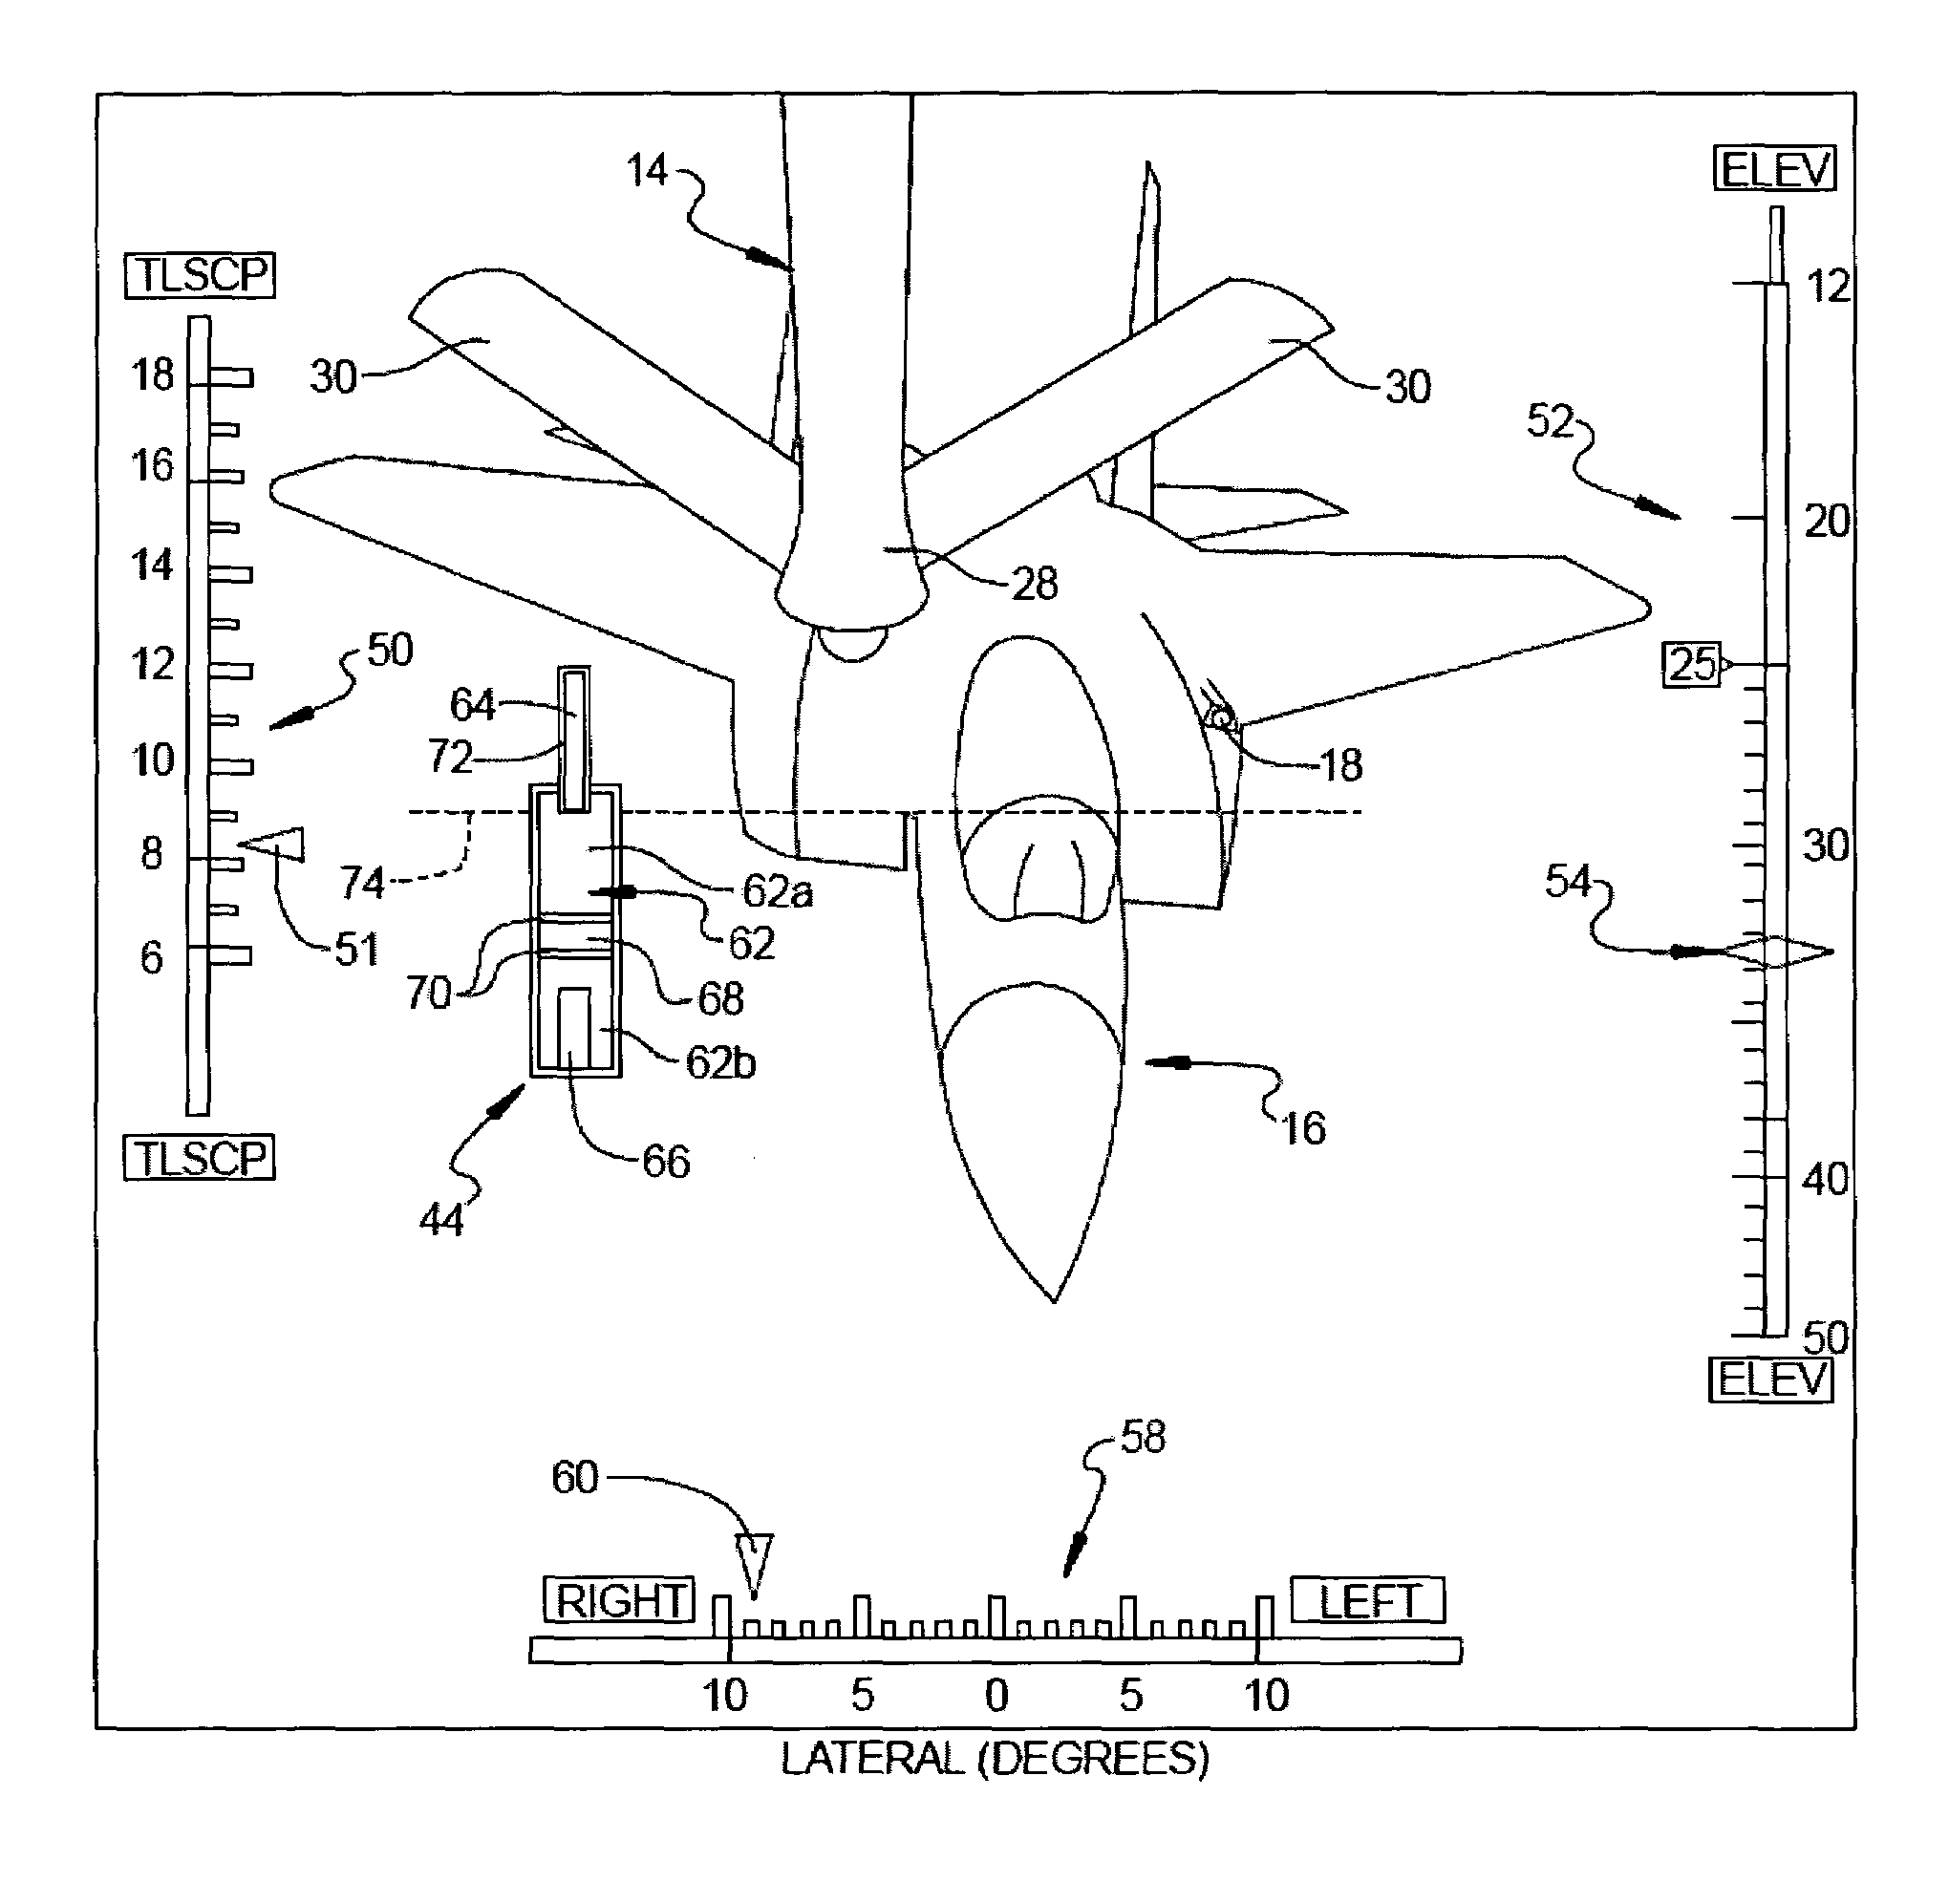 Vision system and method incorporating graphics symbology for use in a tanker refueling system